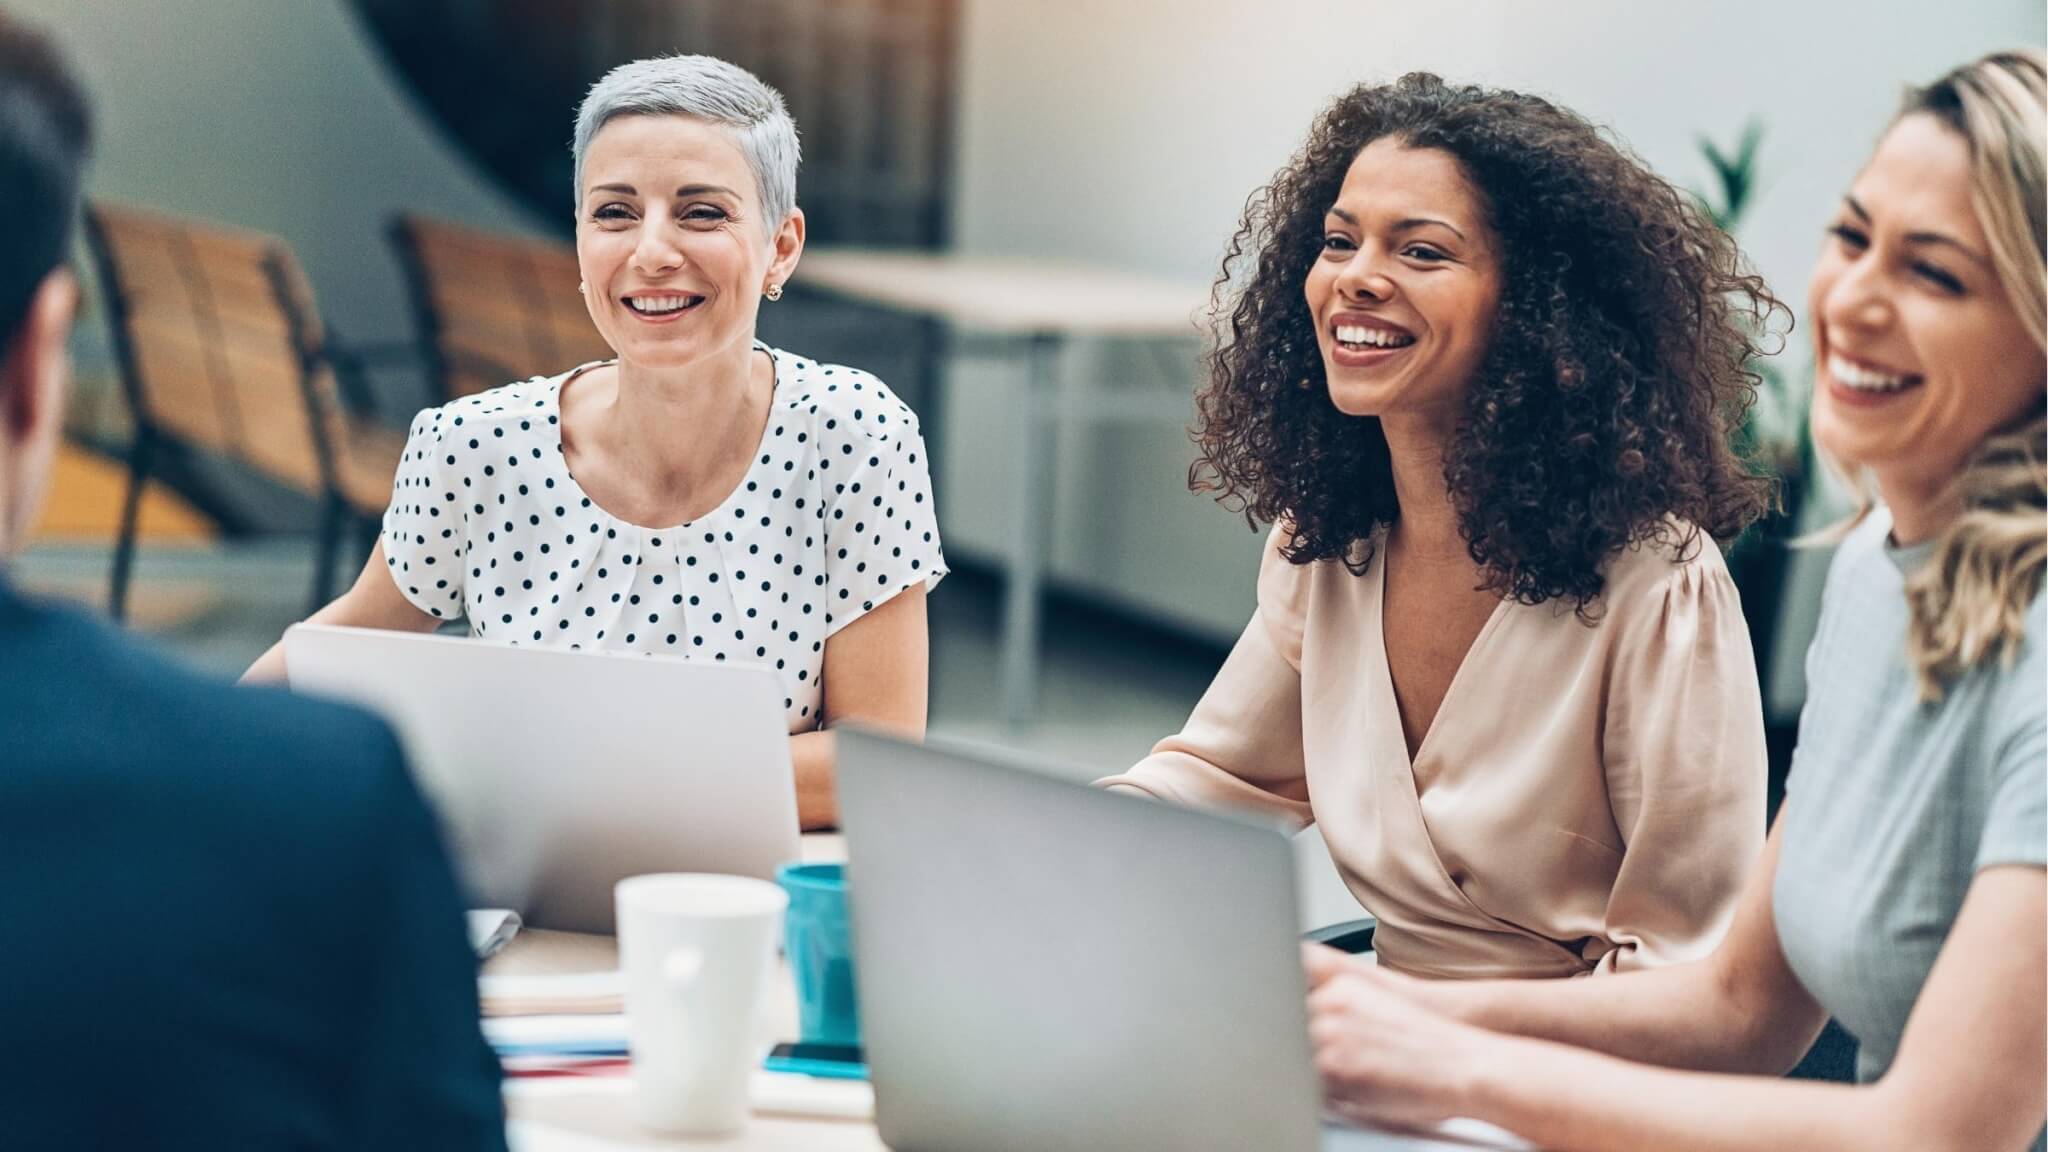 Encouraging More Women in Leadership: What Your Organization Can Do